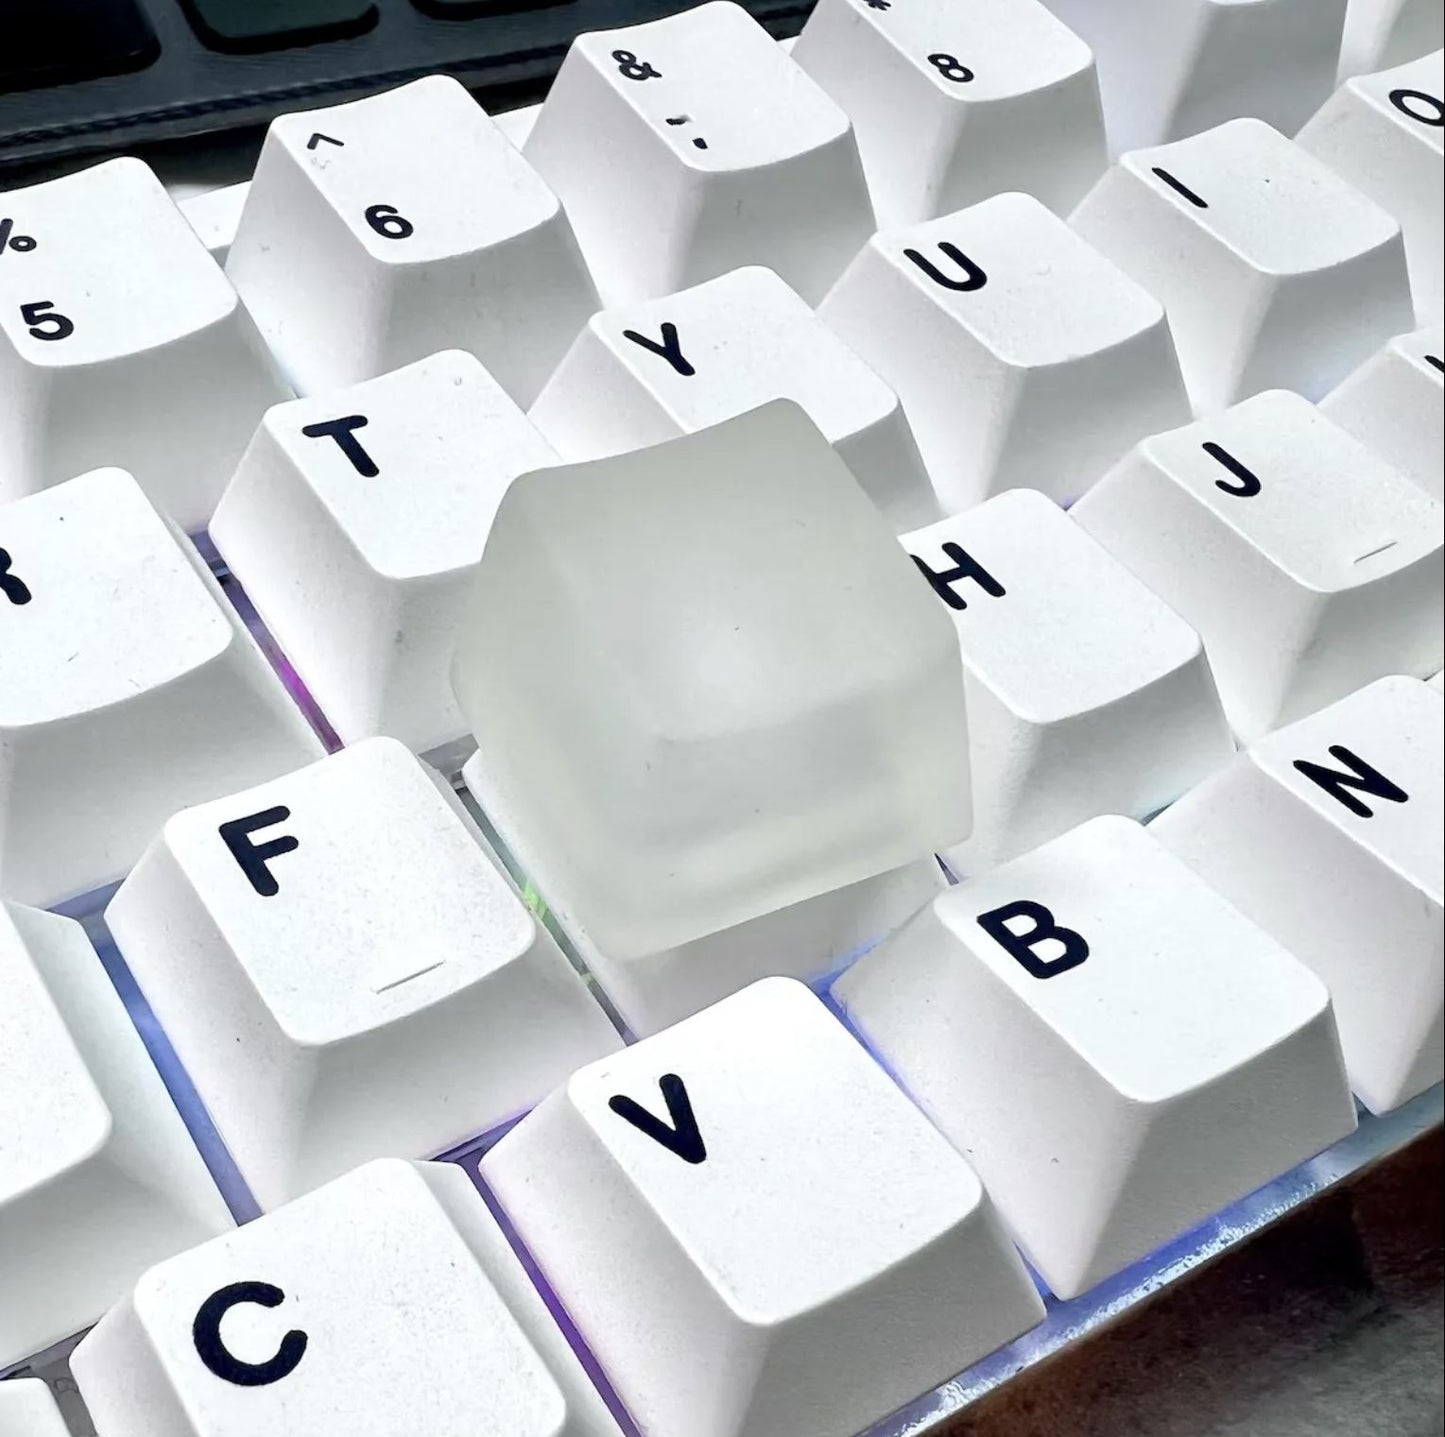 ❄️ Unleash the Arctic Coolness: Introducing our Frosted Ice Cube Keycaps, a masterpiece that brings the frosty allure of translucent crystals to your keyboard.